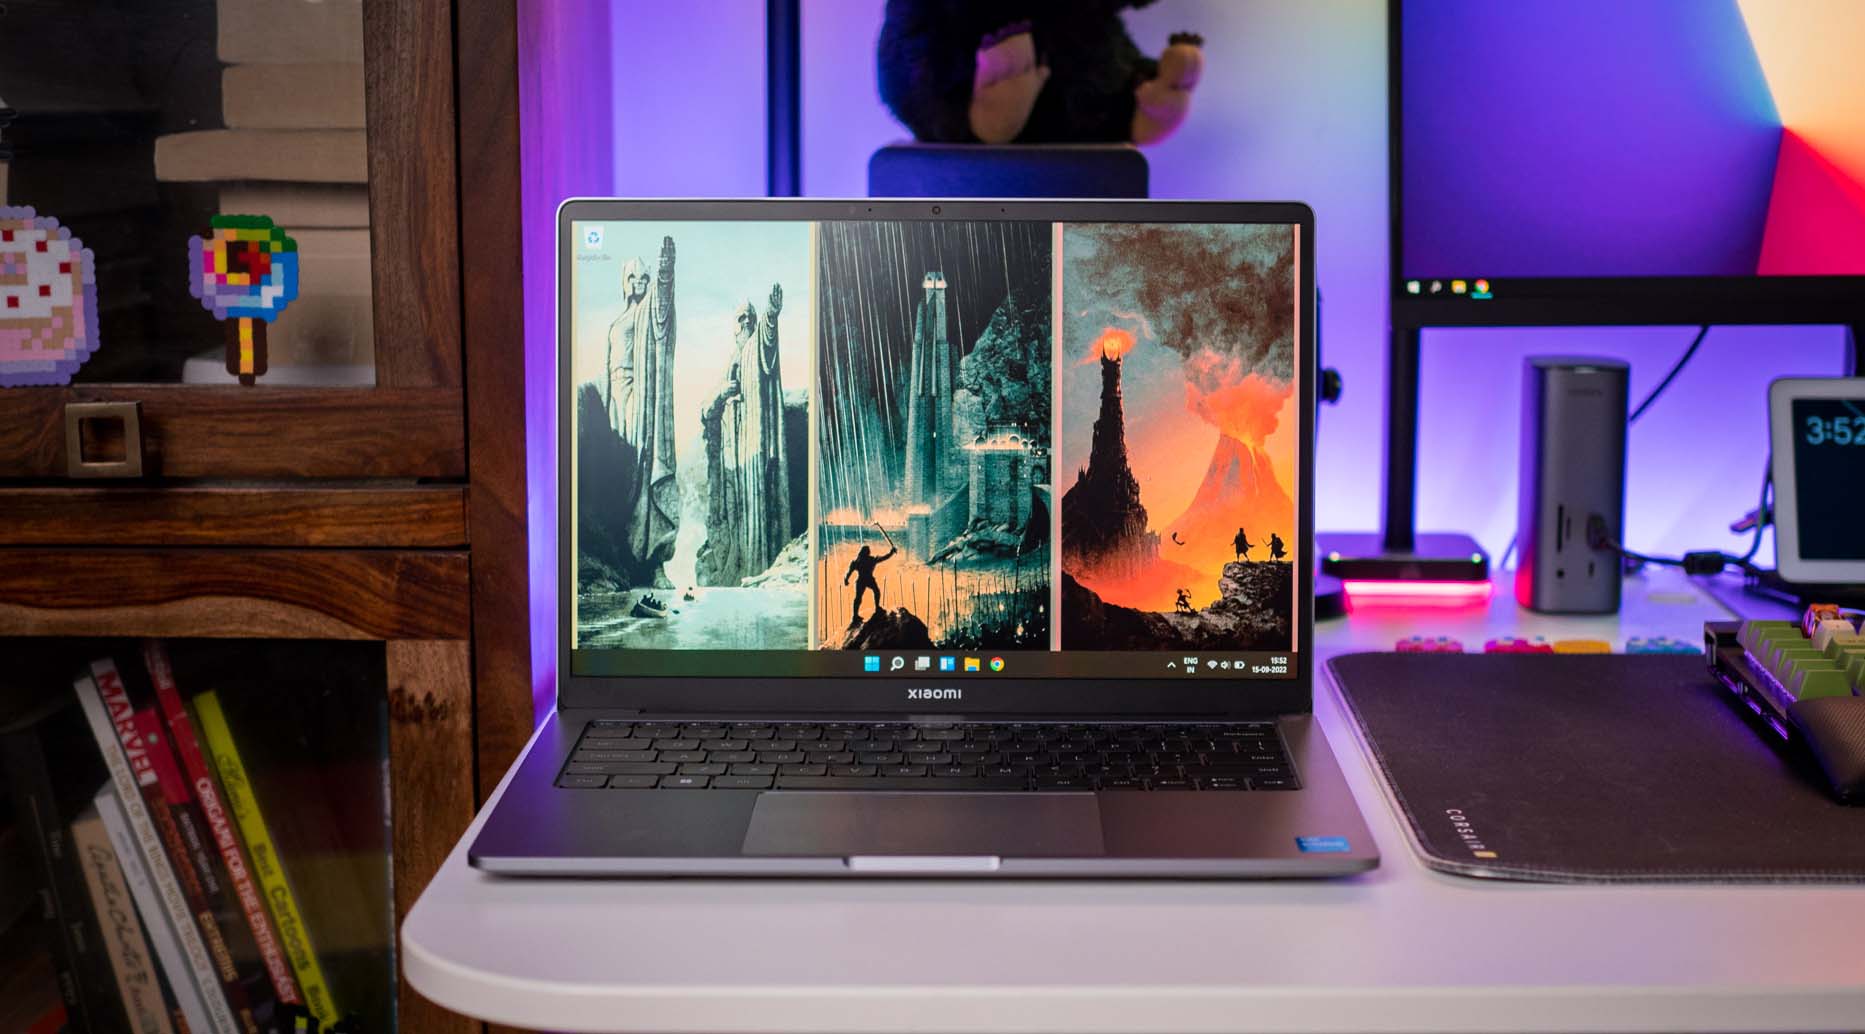 Xiaomi launches Mi Notebook Ultra and Mi Notebook Pro; check details